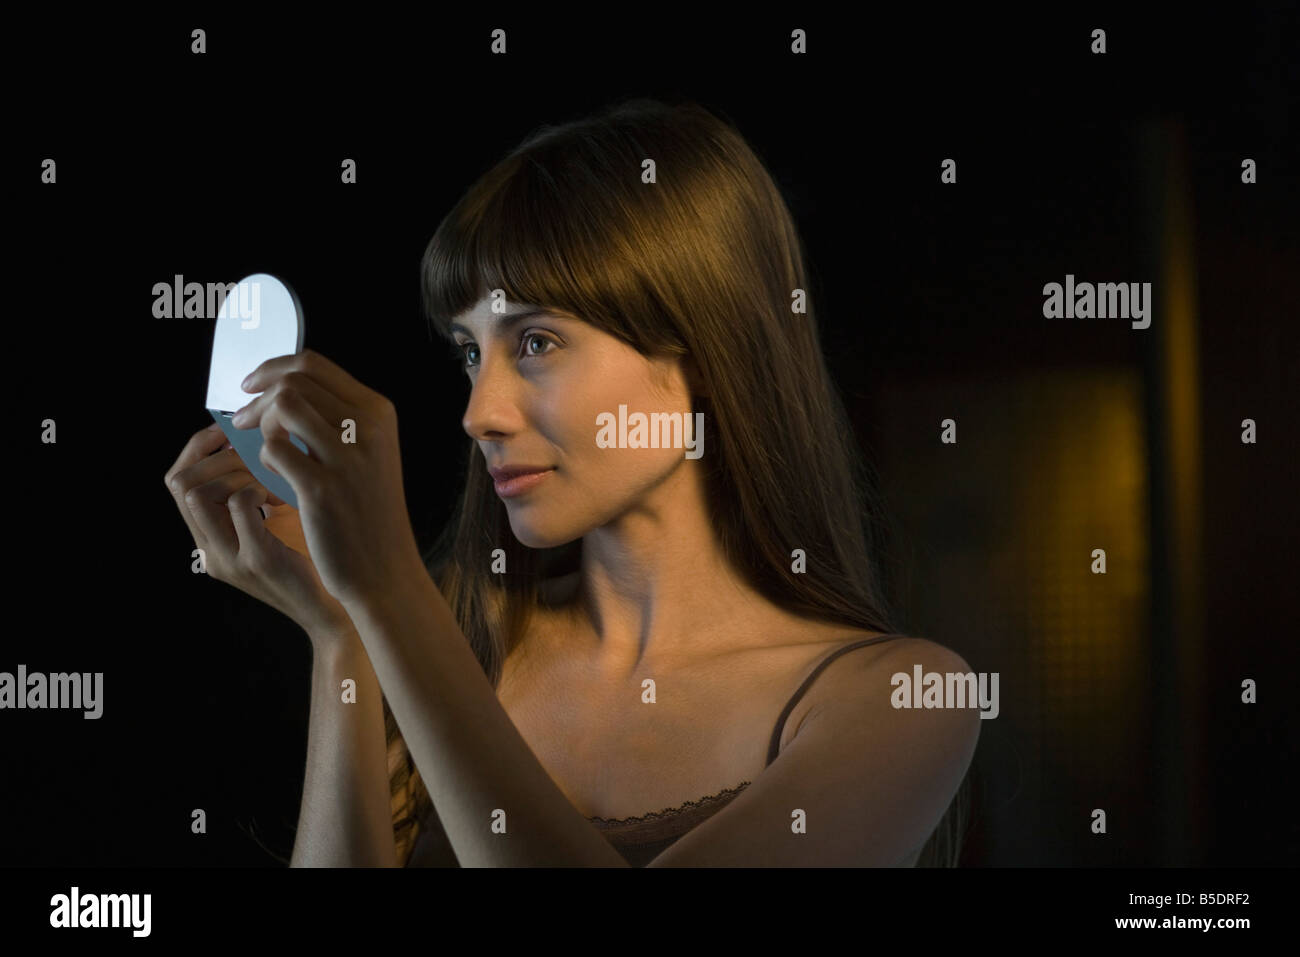 Woman looking at herself in handheld mirror Stock Photo